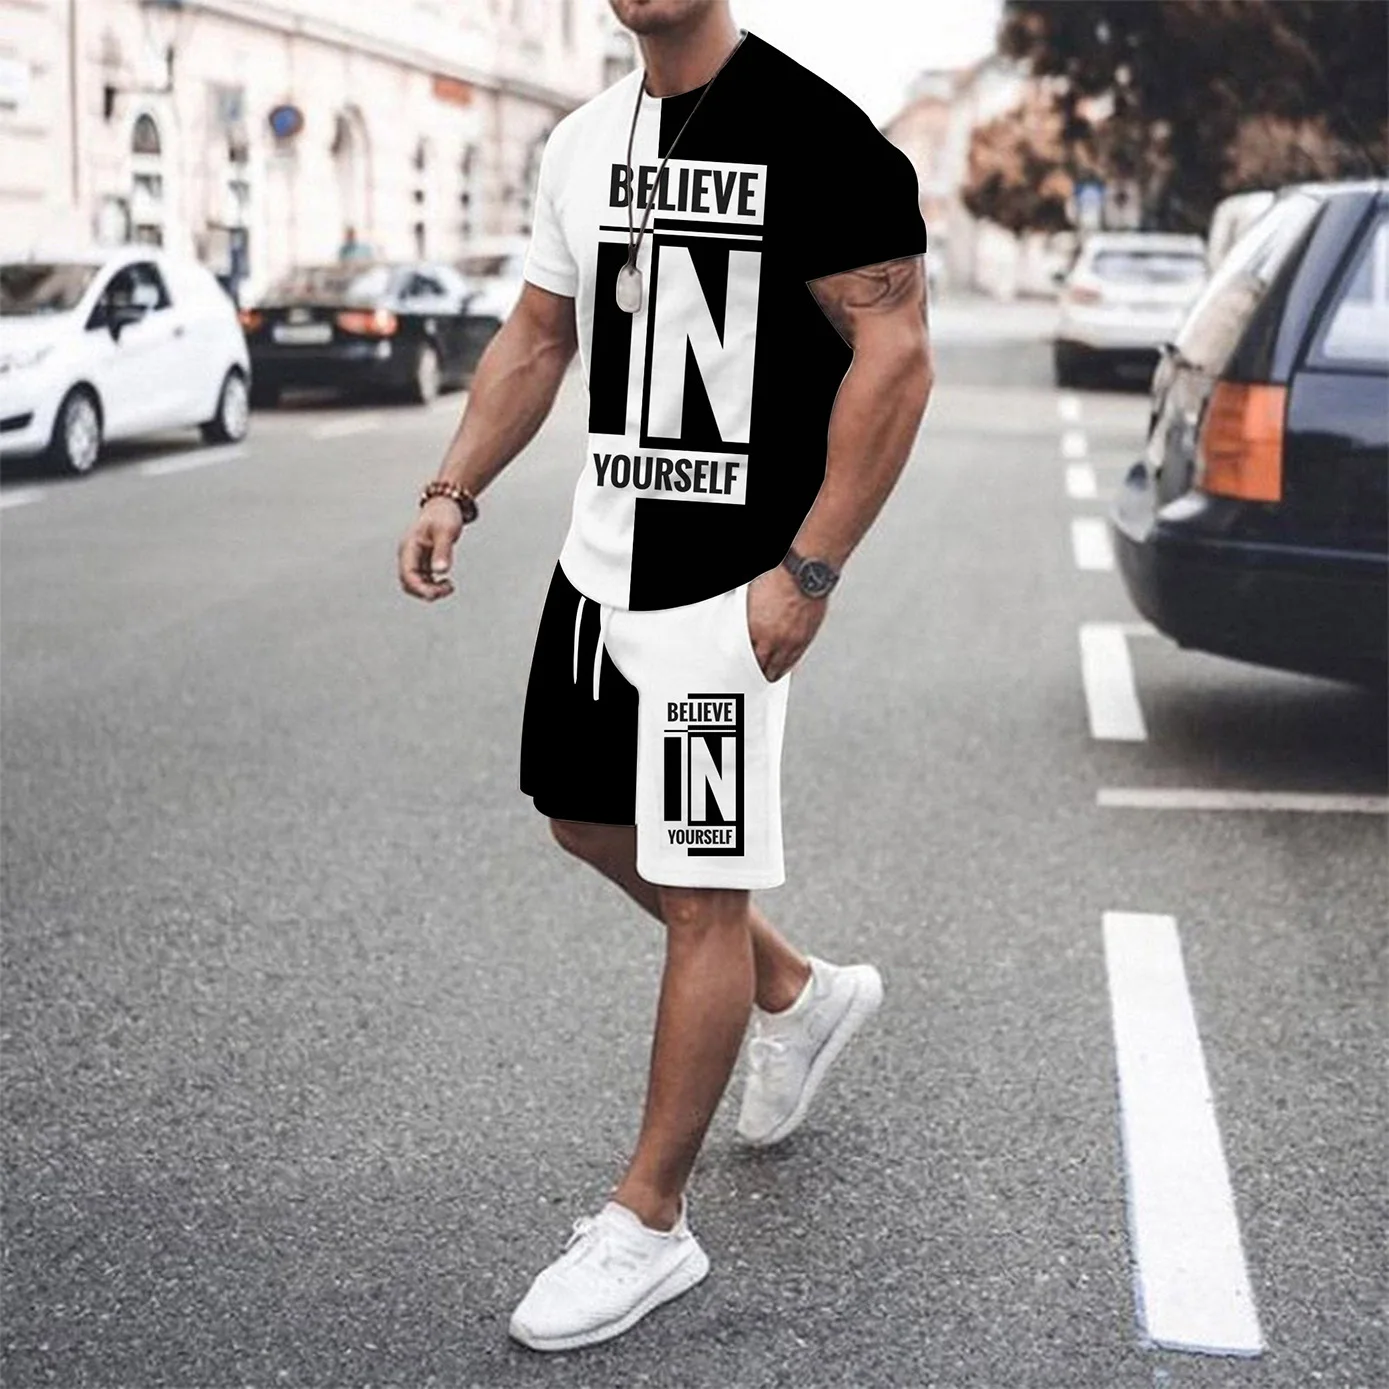 Summer Cool Believe In Yourself Men's Short-sleeved Tshirts Shorts Suit Beach Tracksuit 2 Piece Set Outfit Set Casual Breathable